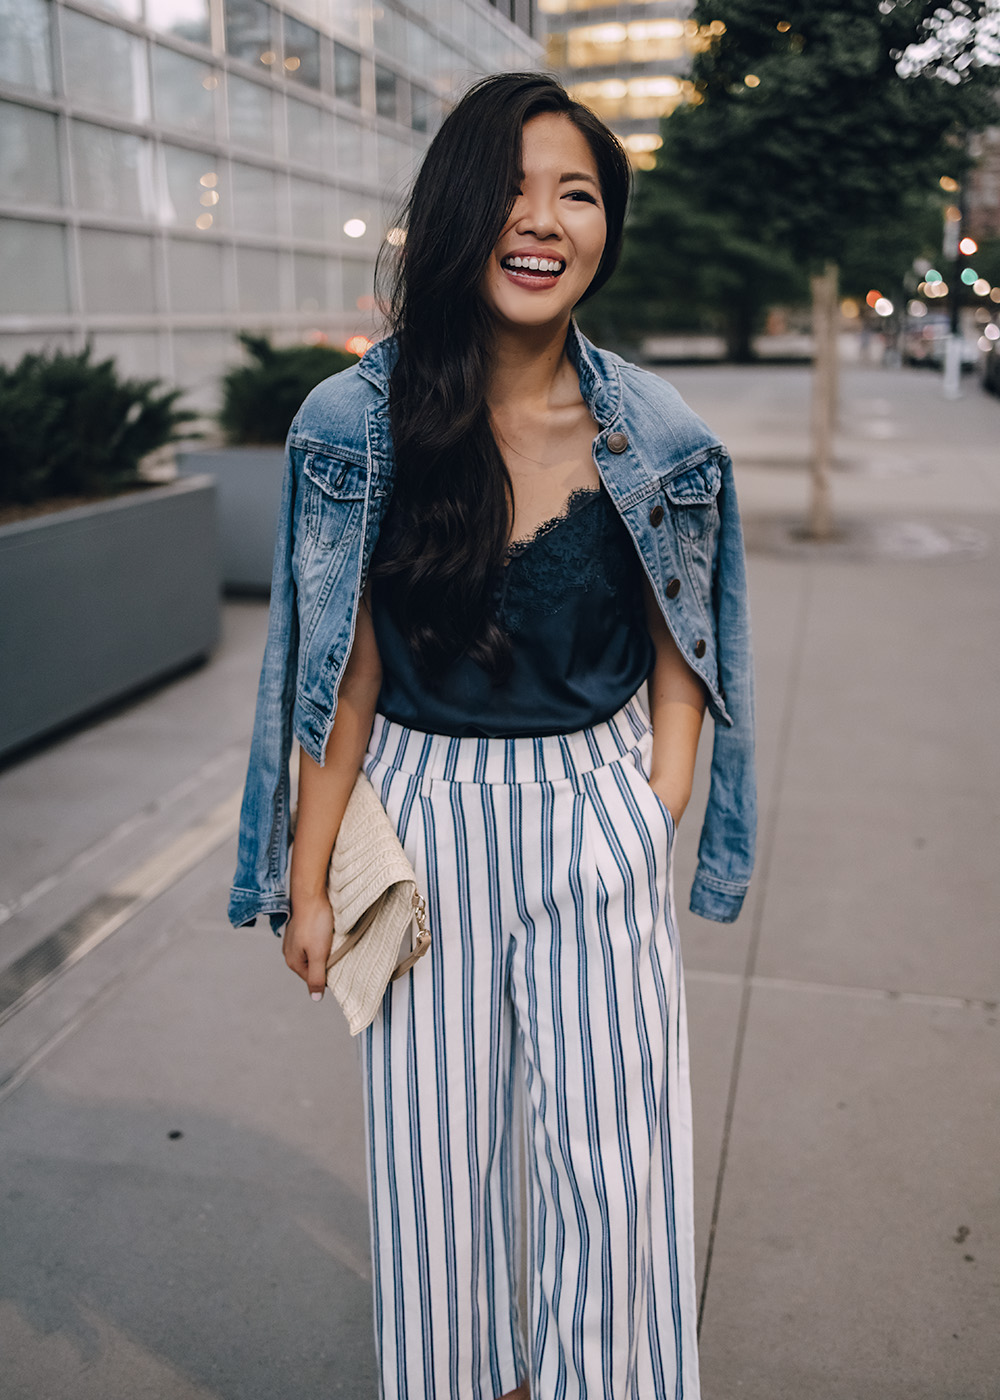 Casual Outfit for Women: Denim Jacket, Navy Lace Cami, Blue & White Striped Pants